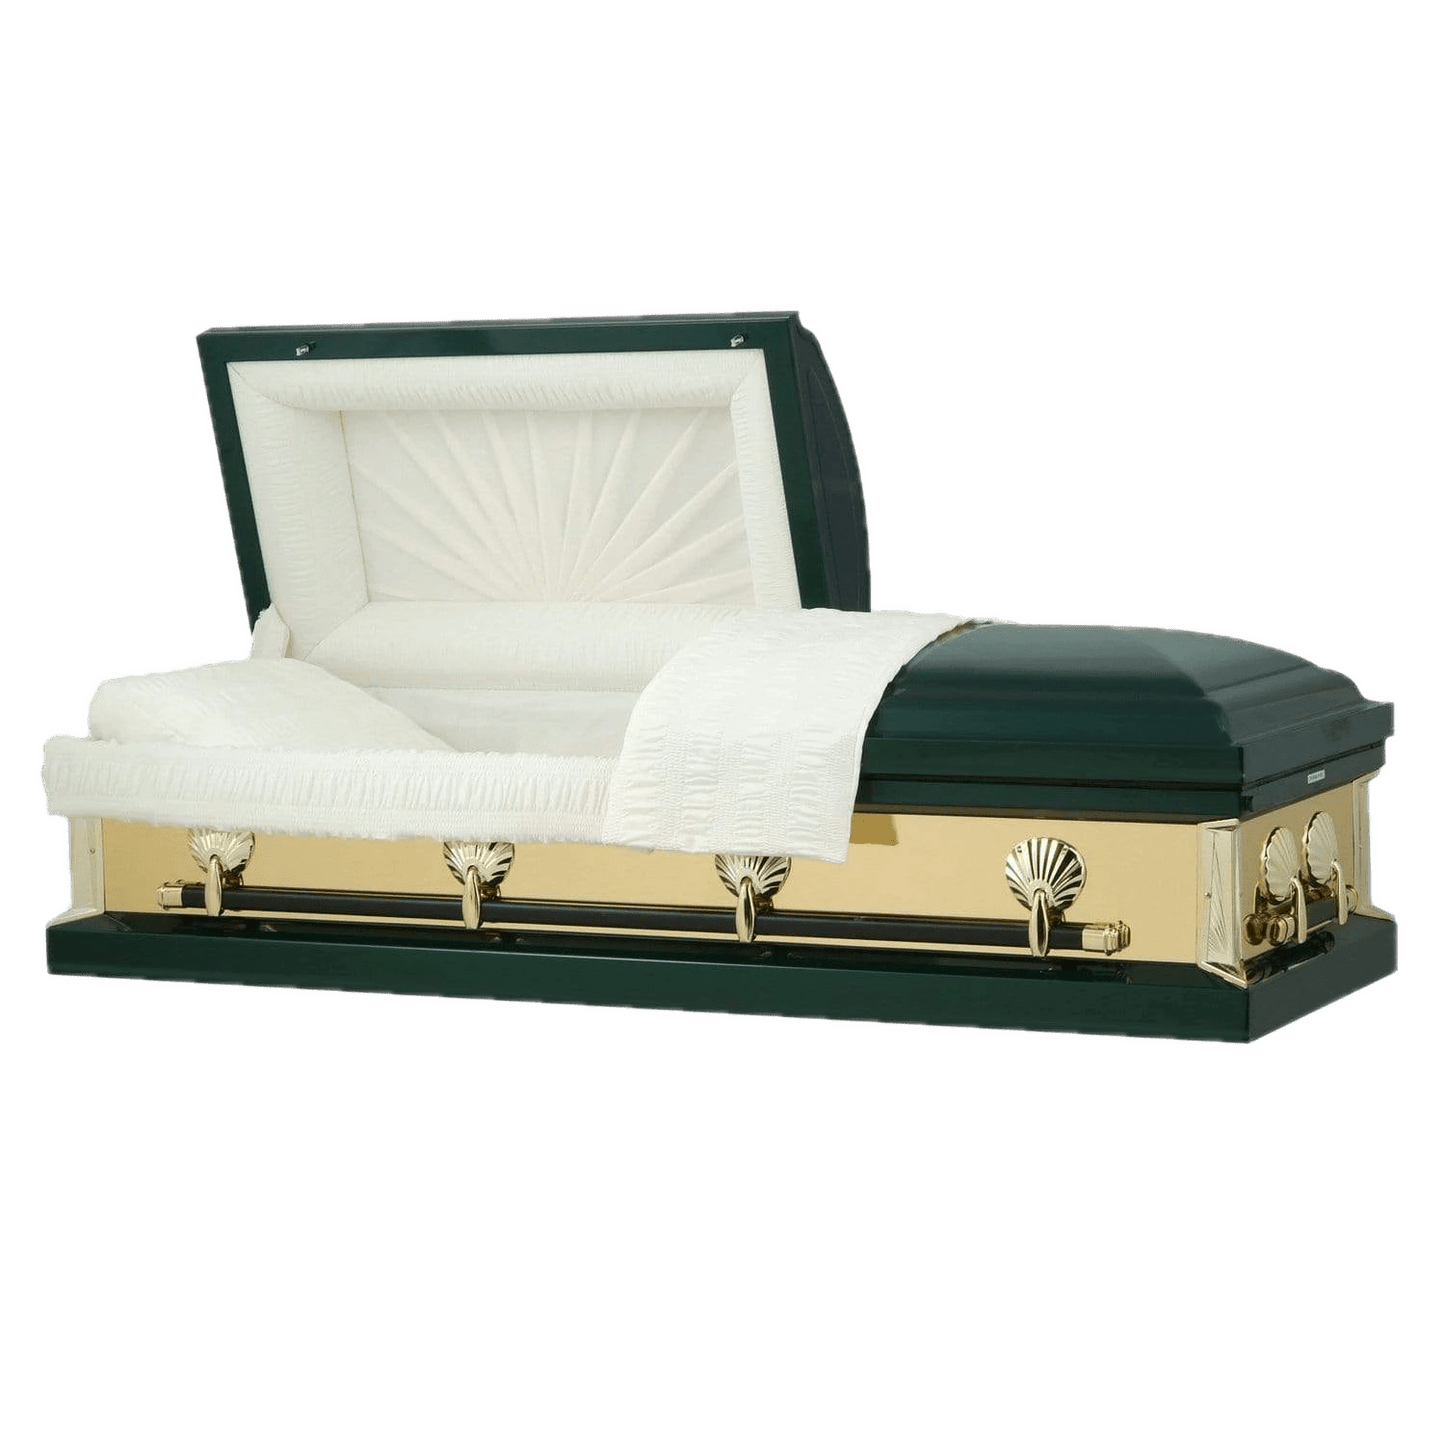 Reflections Series | Hunter Green Steel Casket with White Interior